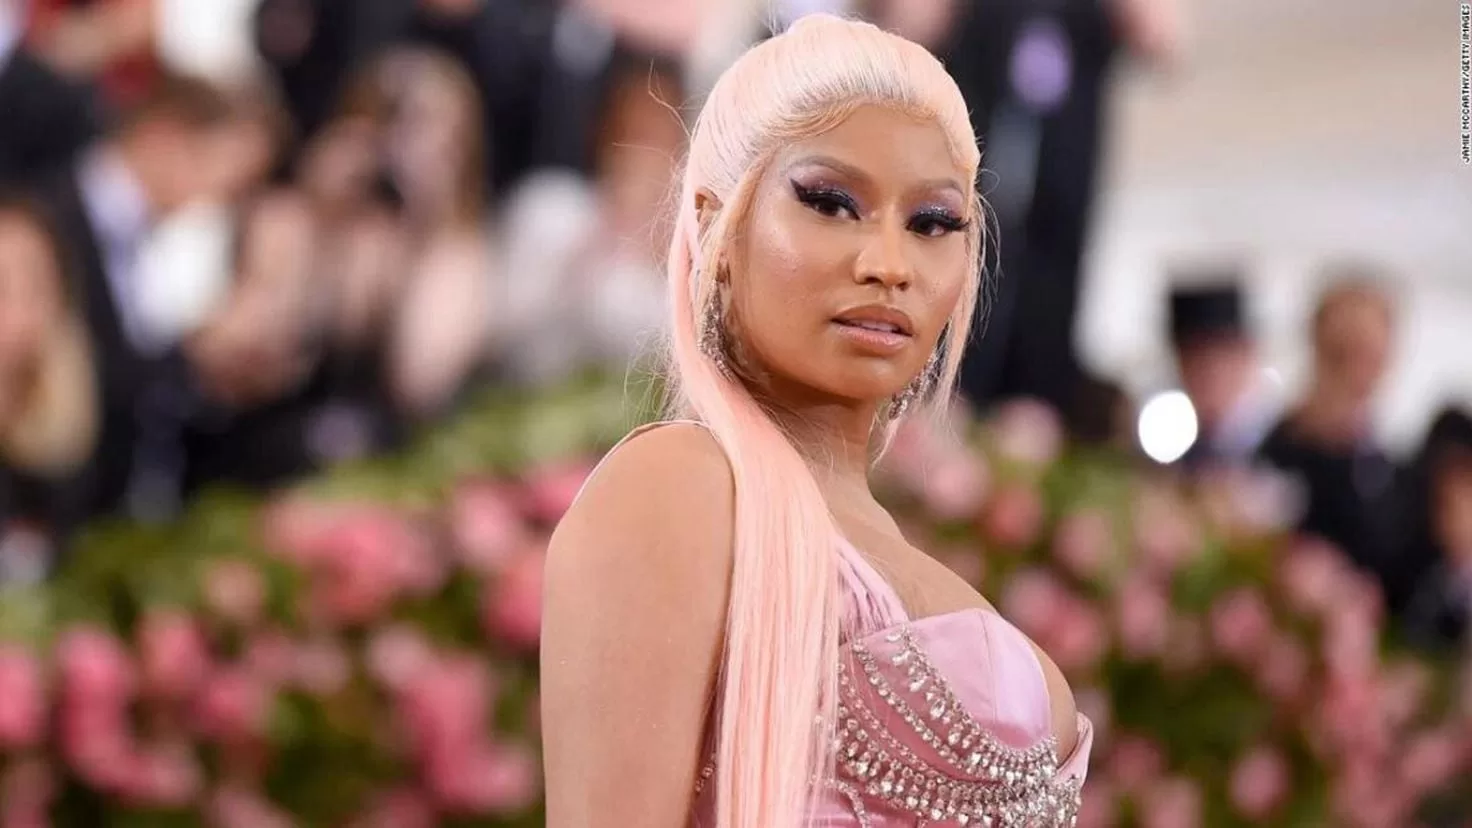 Nicki Minaj and her addiction to medications: Nobody told me it was additive
